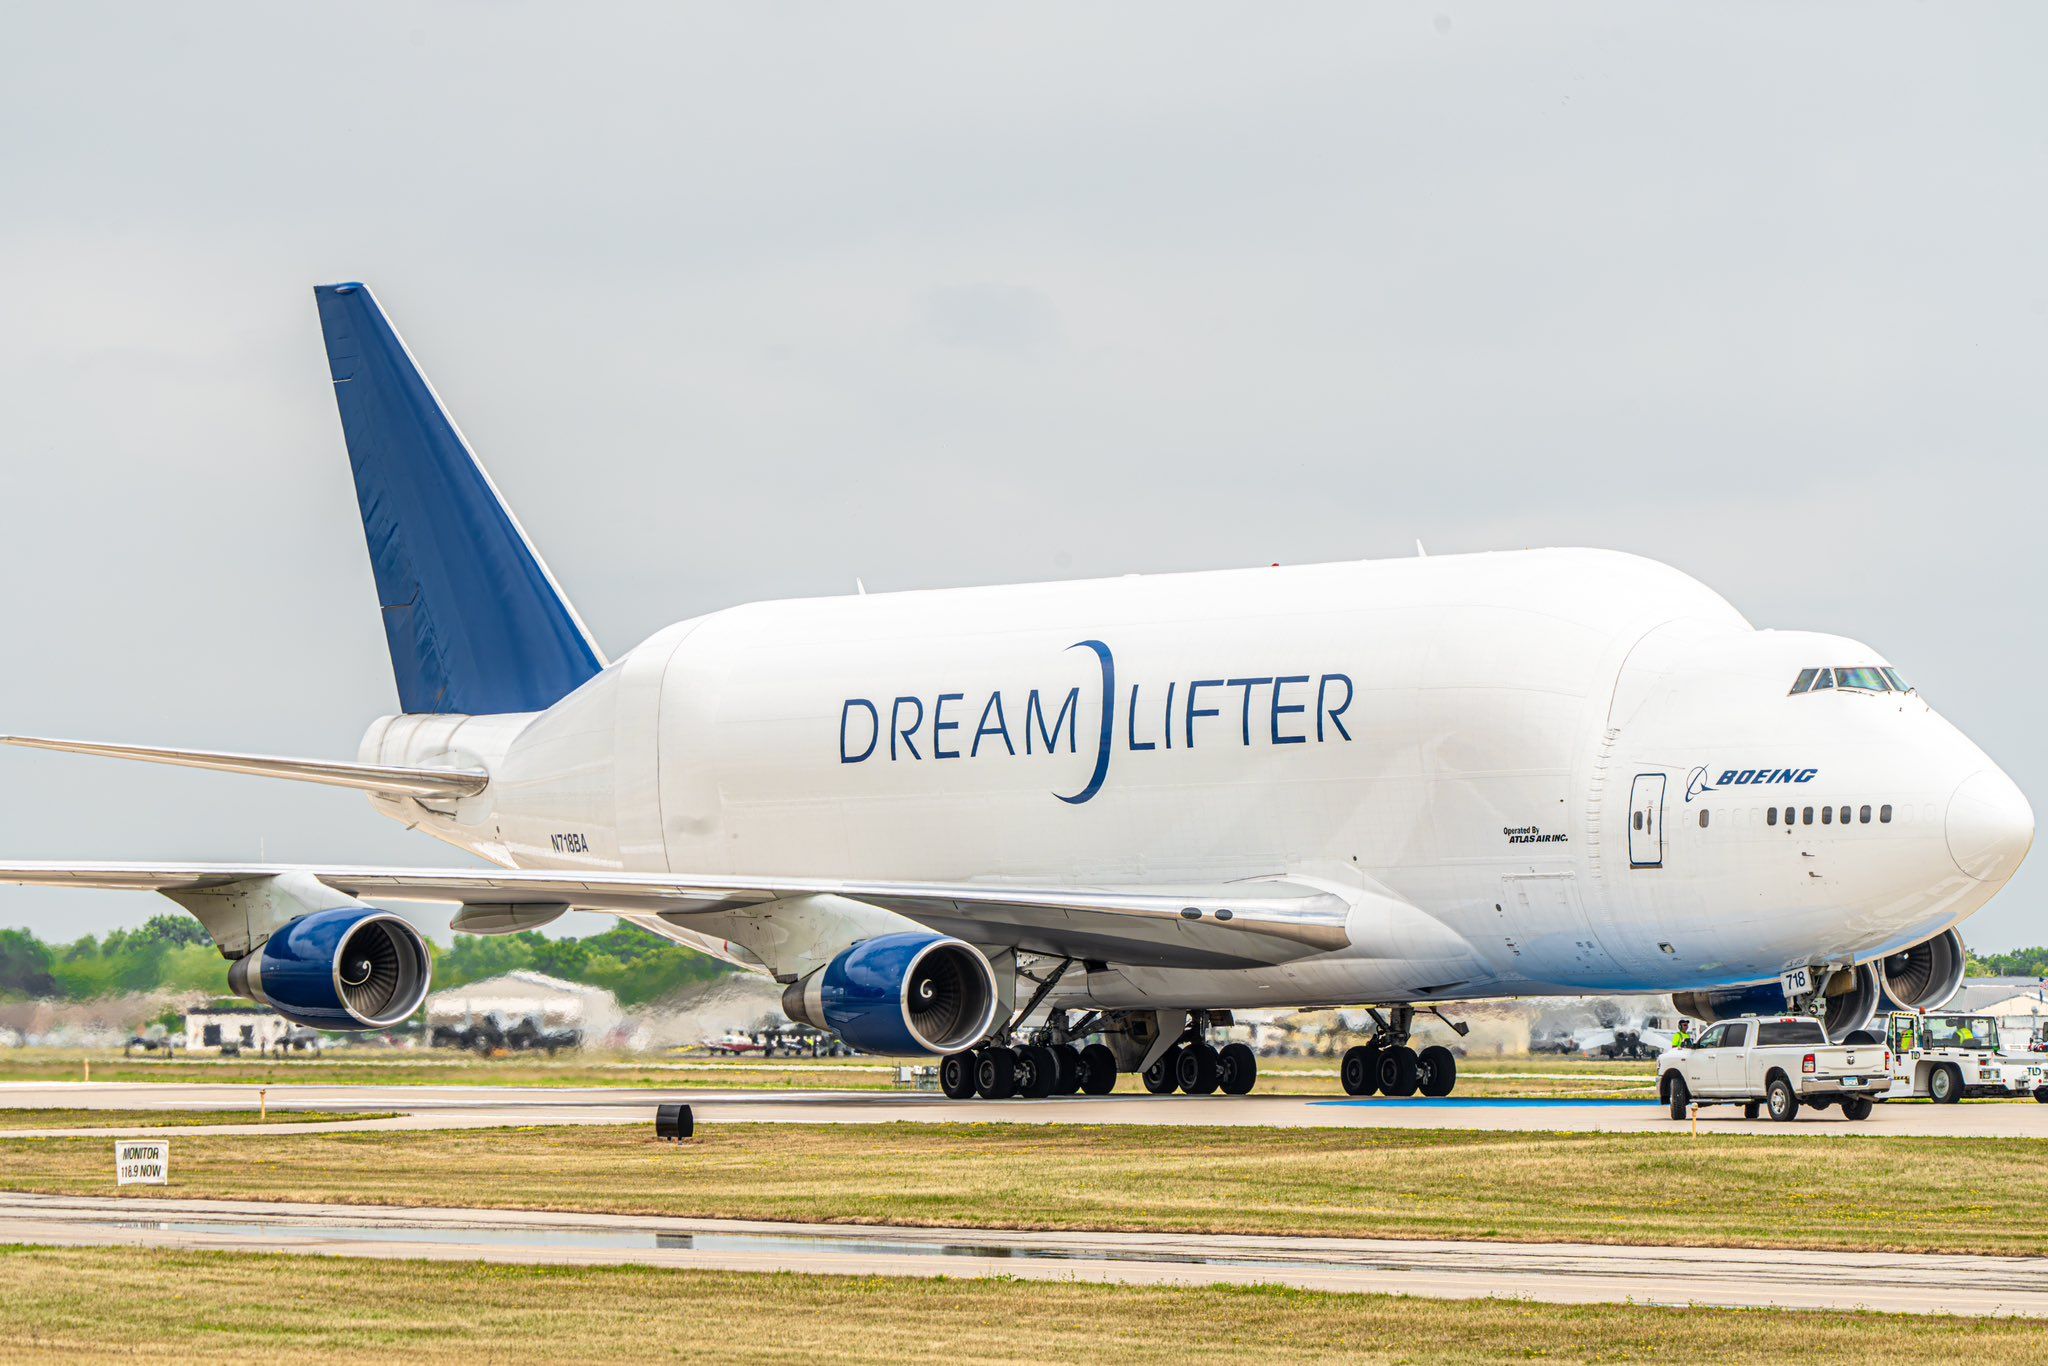 Boeing Dreamlifter about to take off from Oshkosh